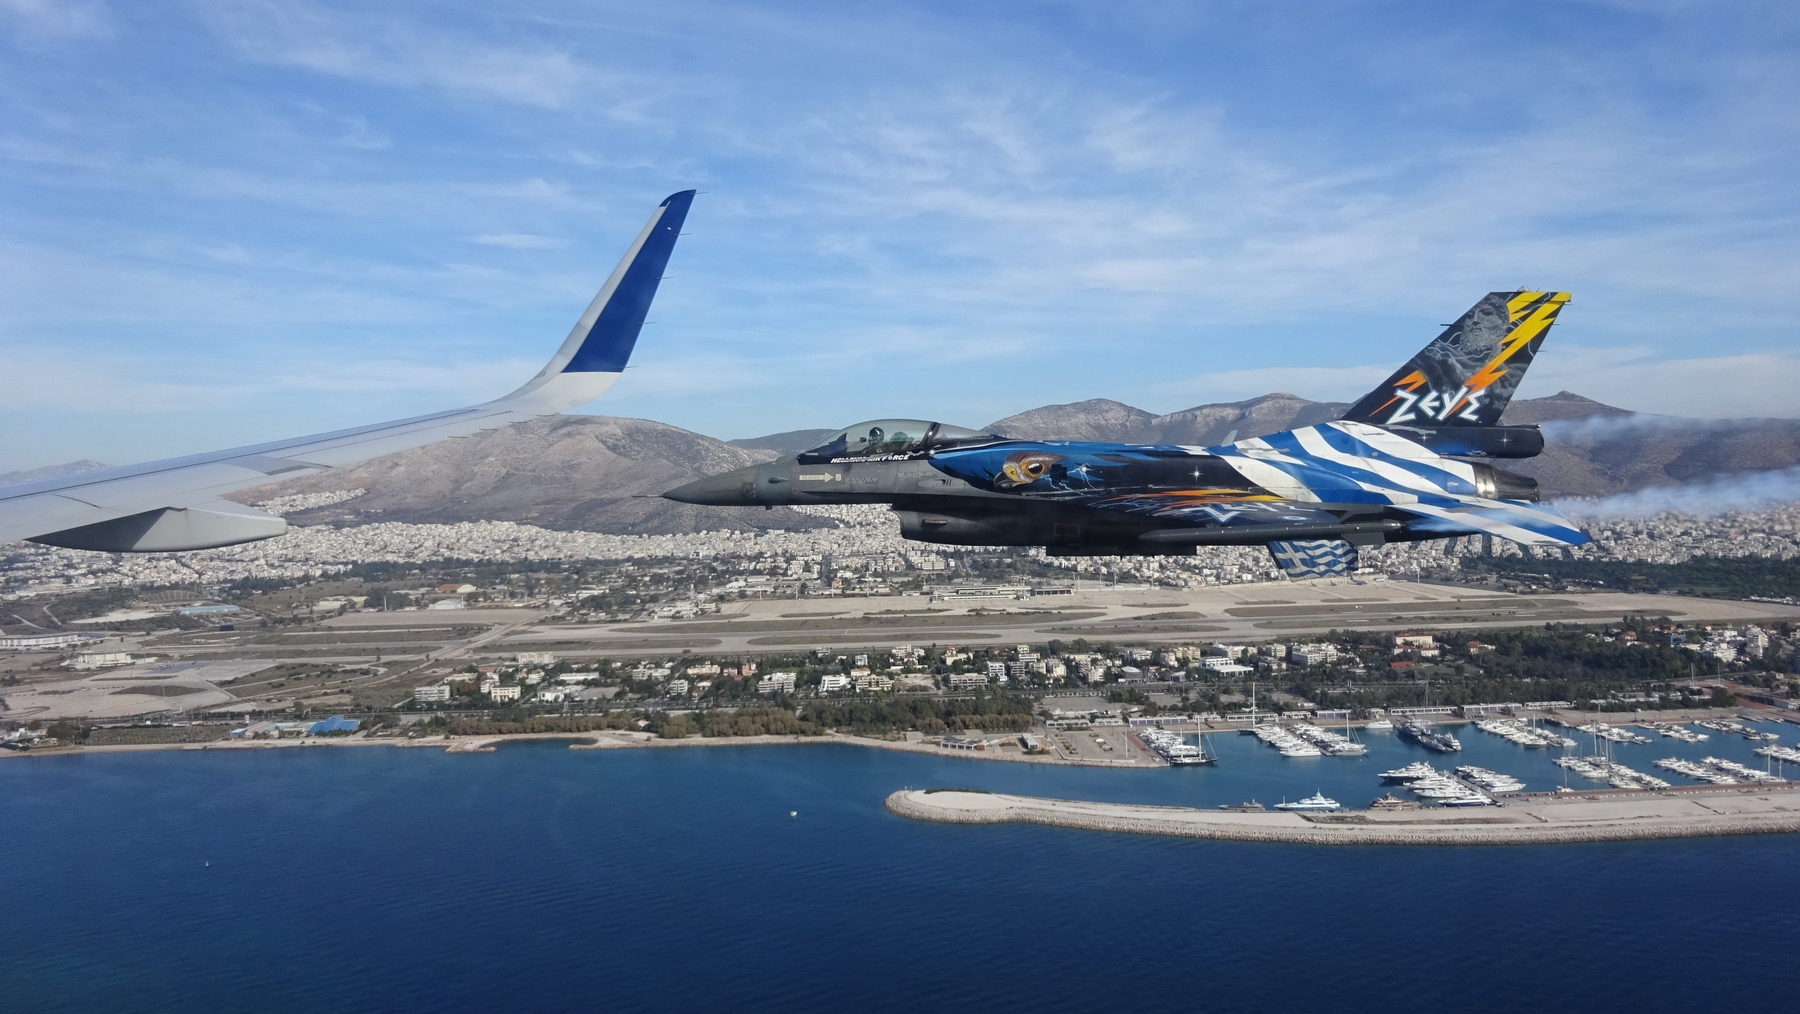 Hellenic Air Force Air to air photography